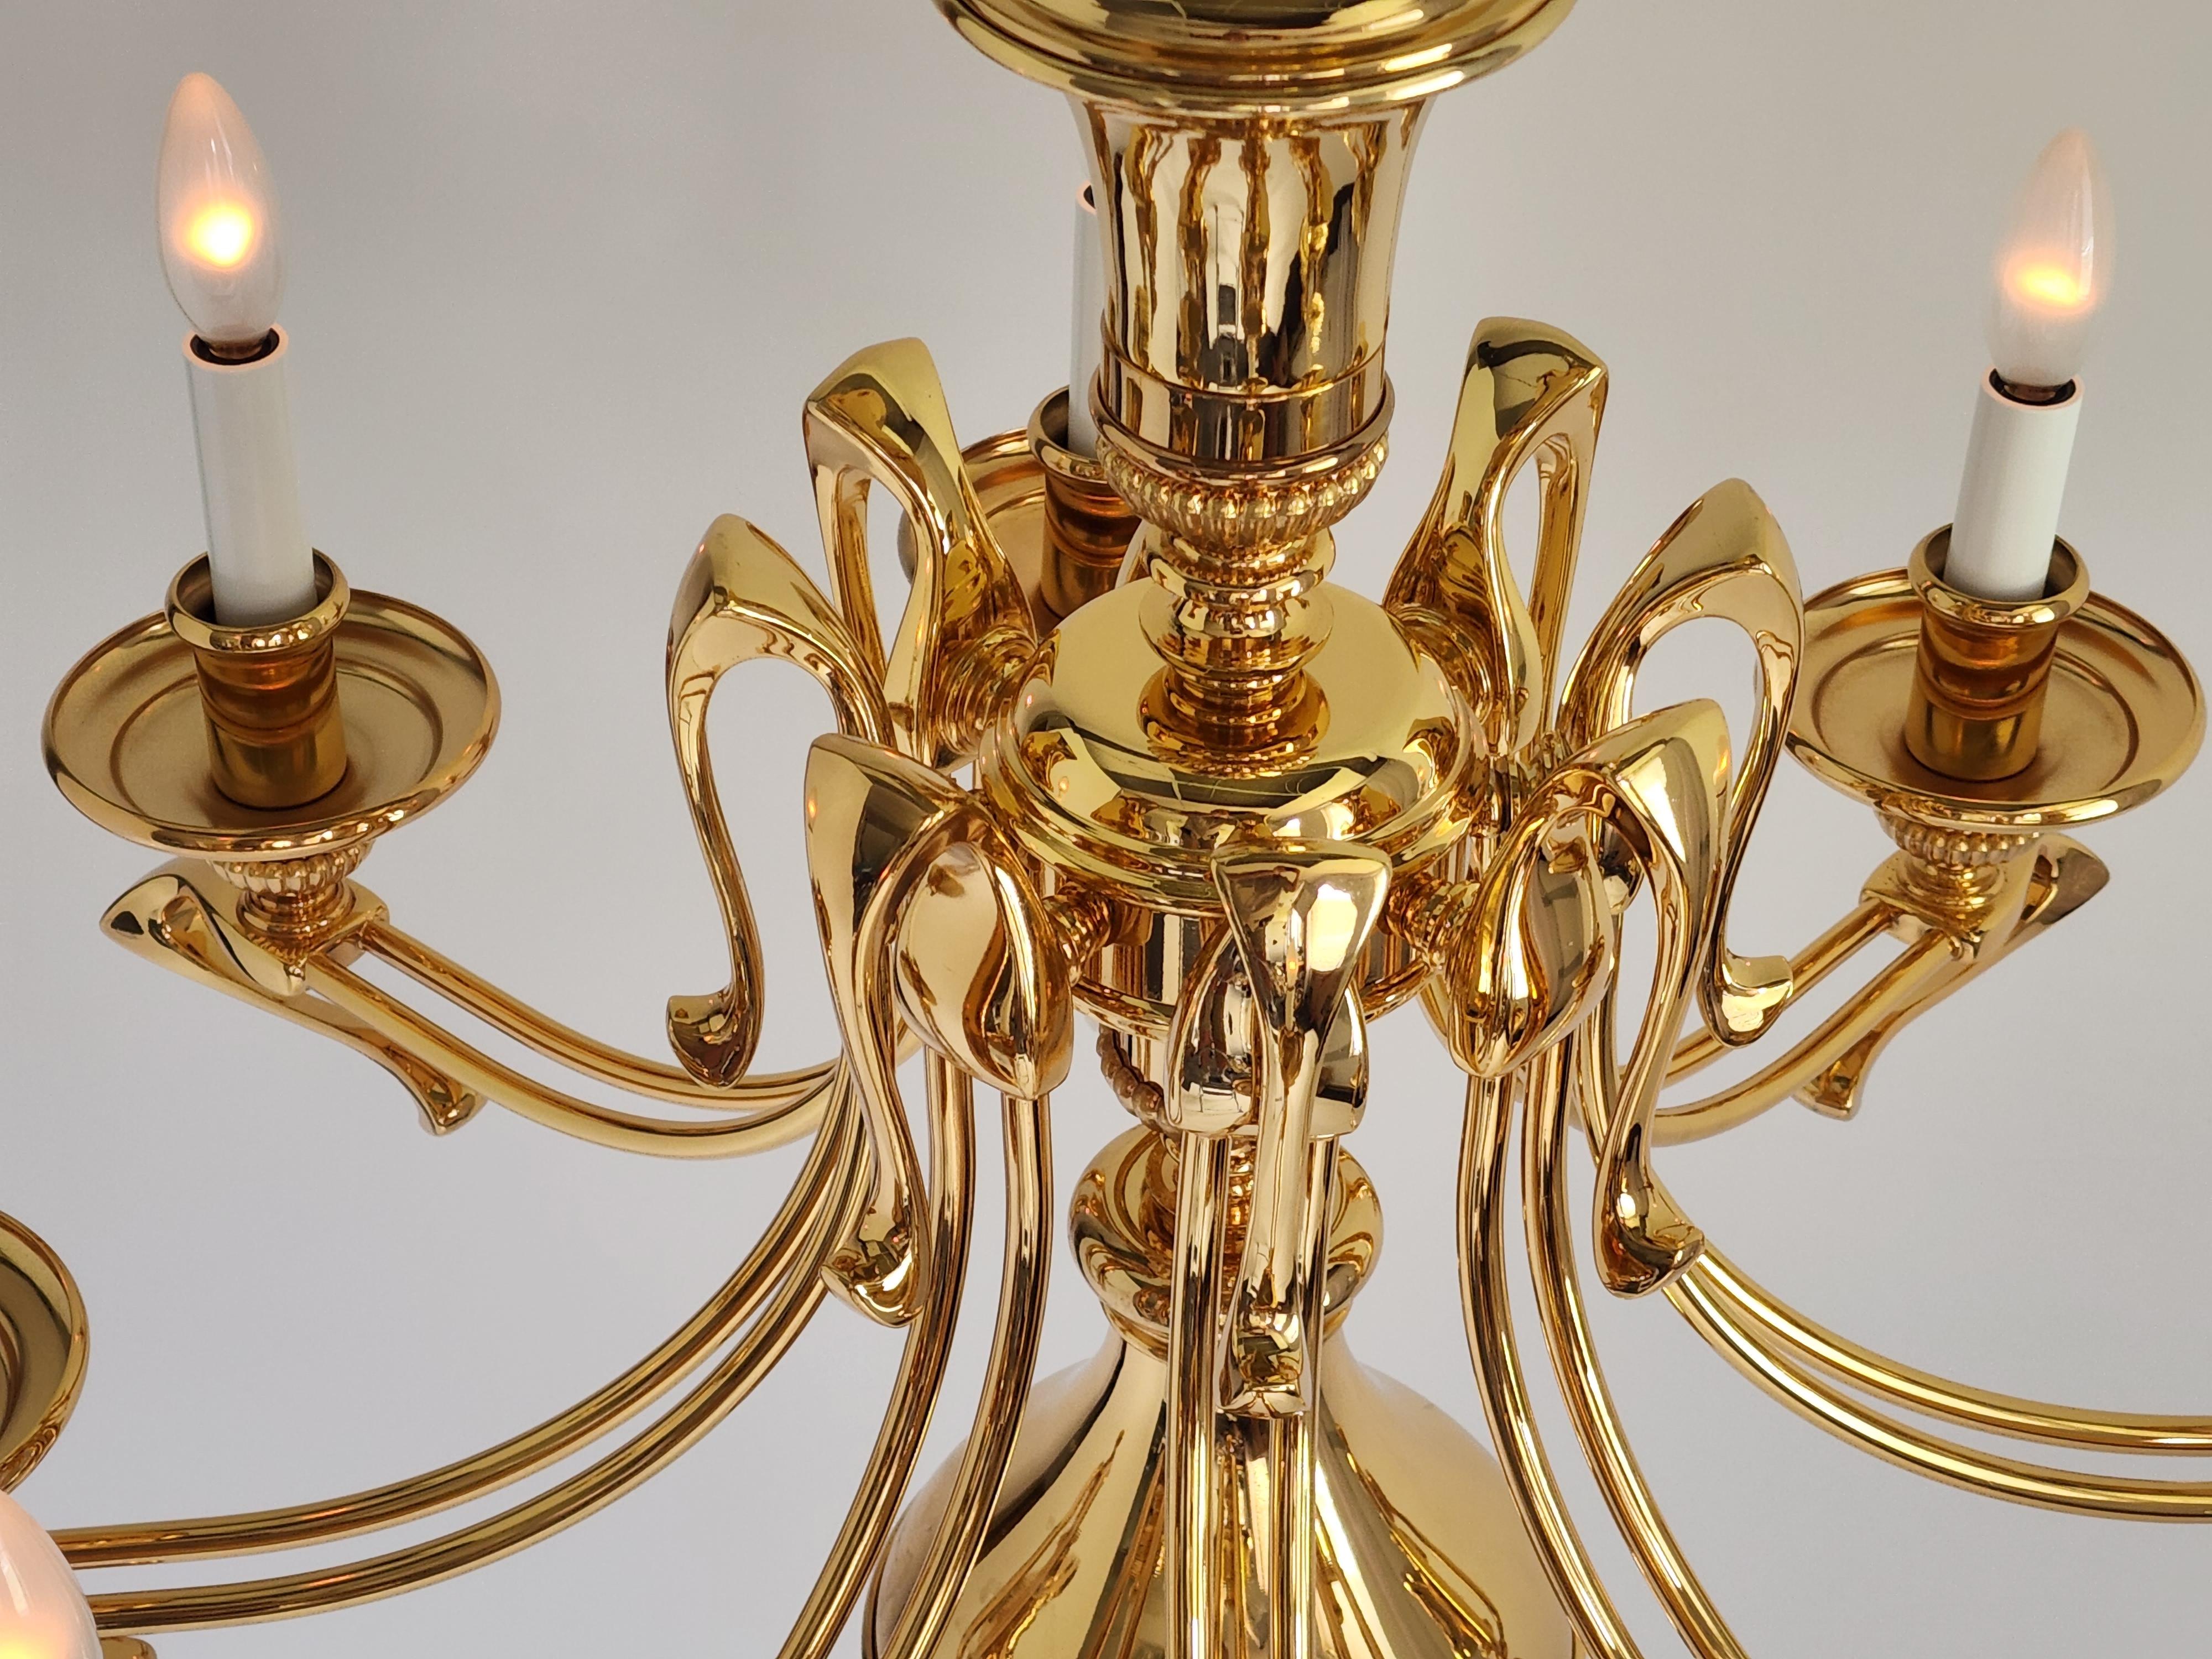 1980s Massive Art Nouveau Style Gold Plated Chandelier, Italy For Sale 6